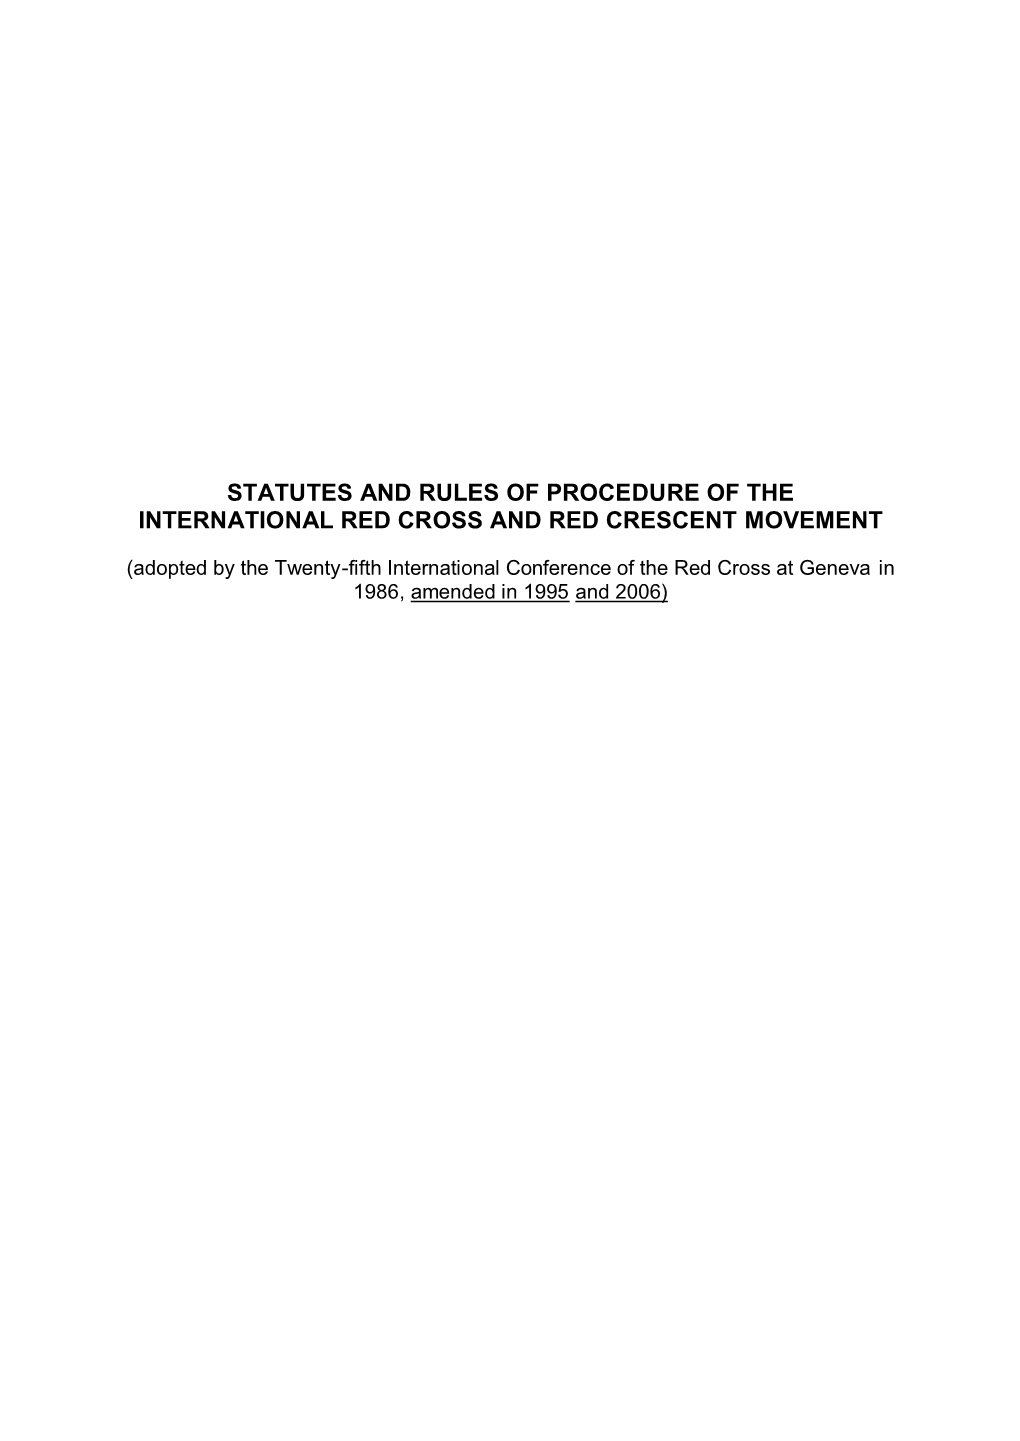 Statutes and Rules of Procedure of the International Red Cross and Red Crescent Movement